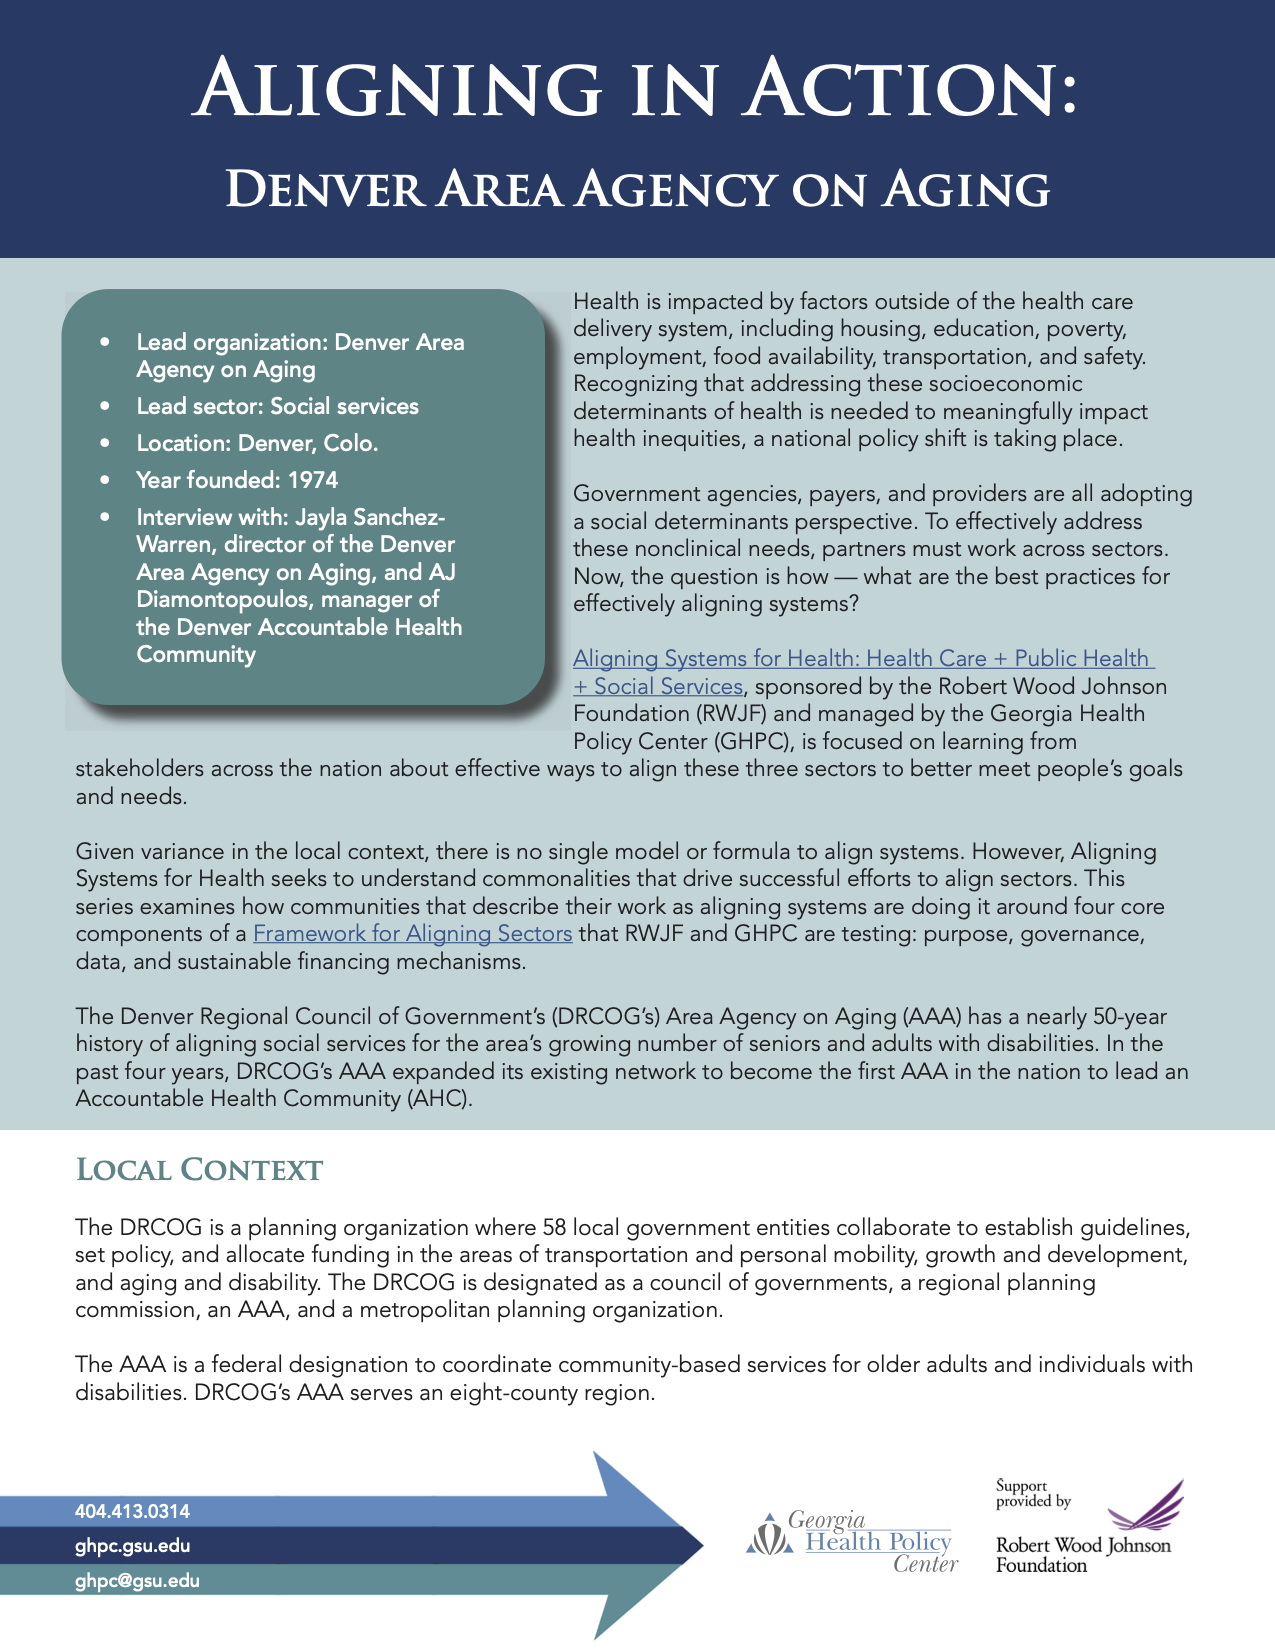 Aligning in Action: Denver Area Agency on Aging